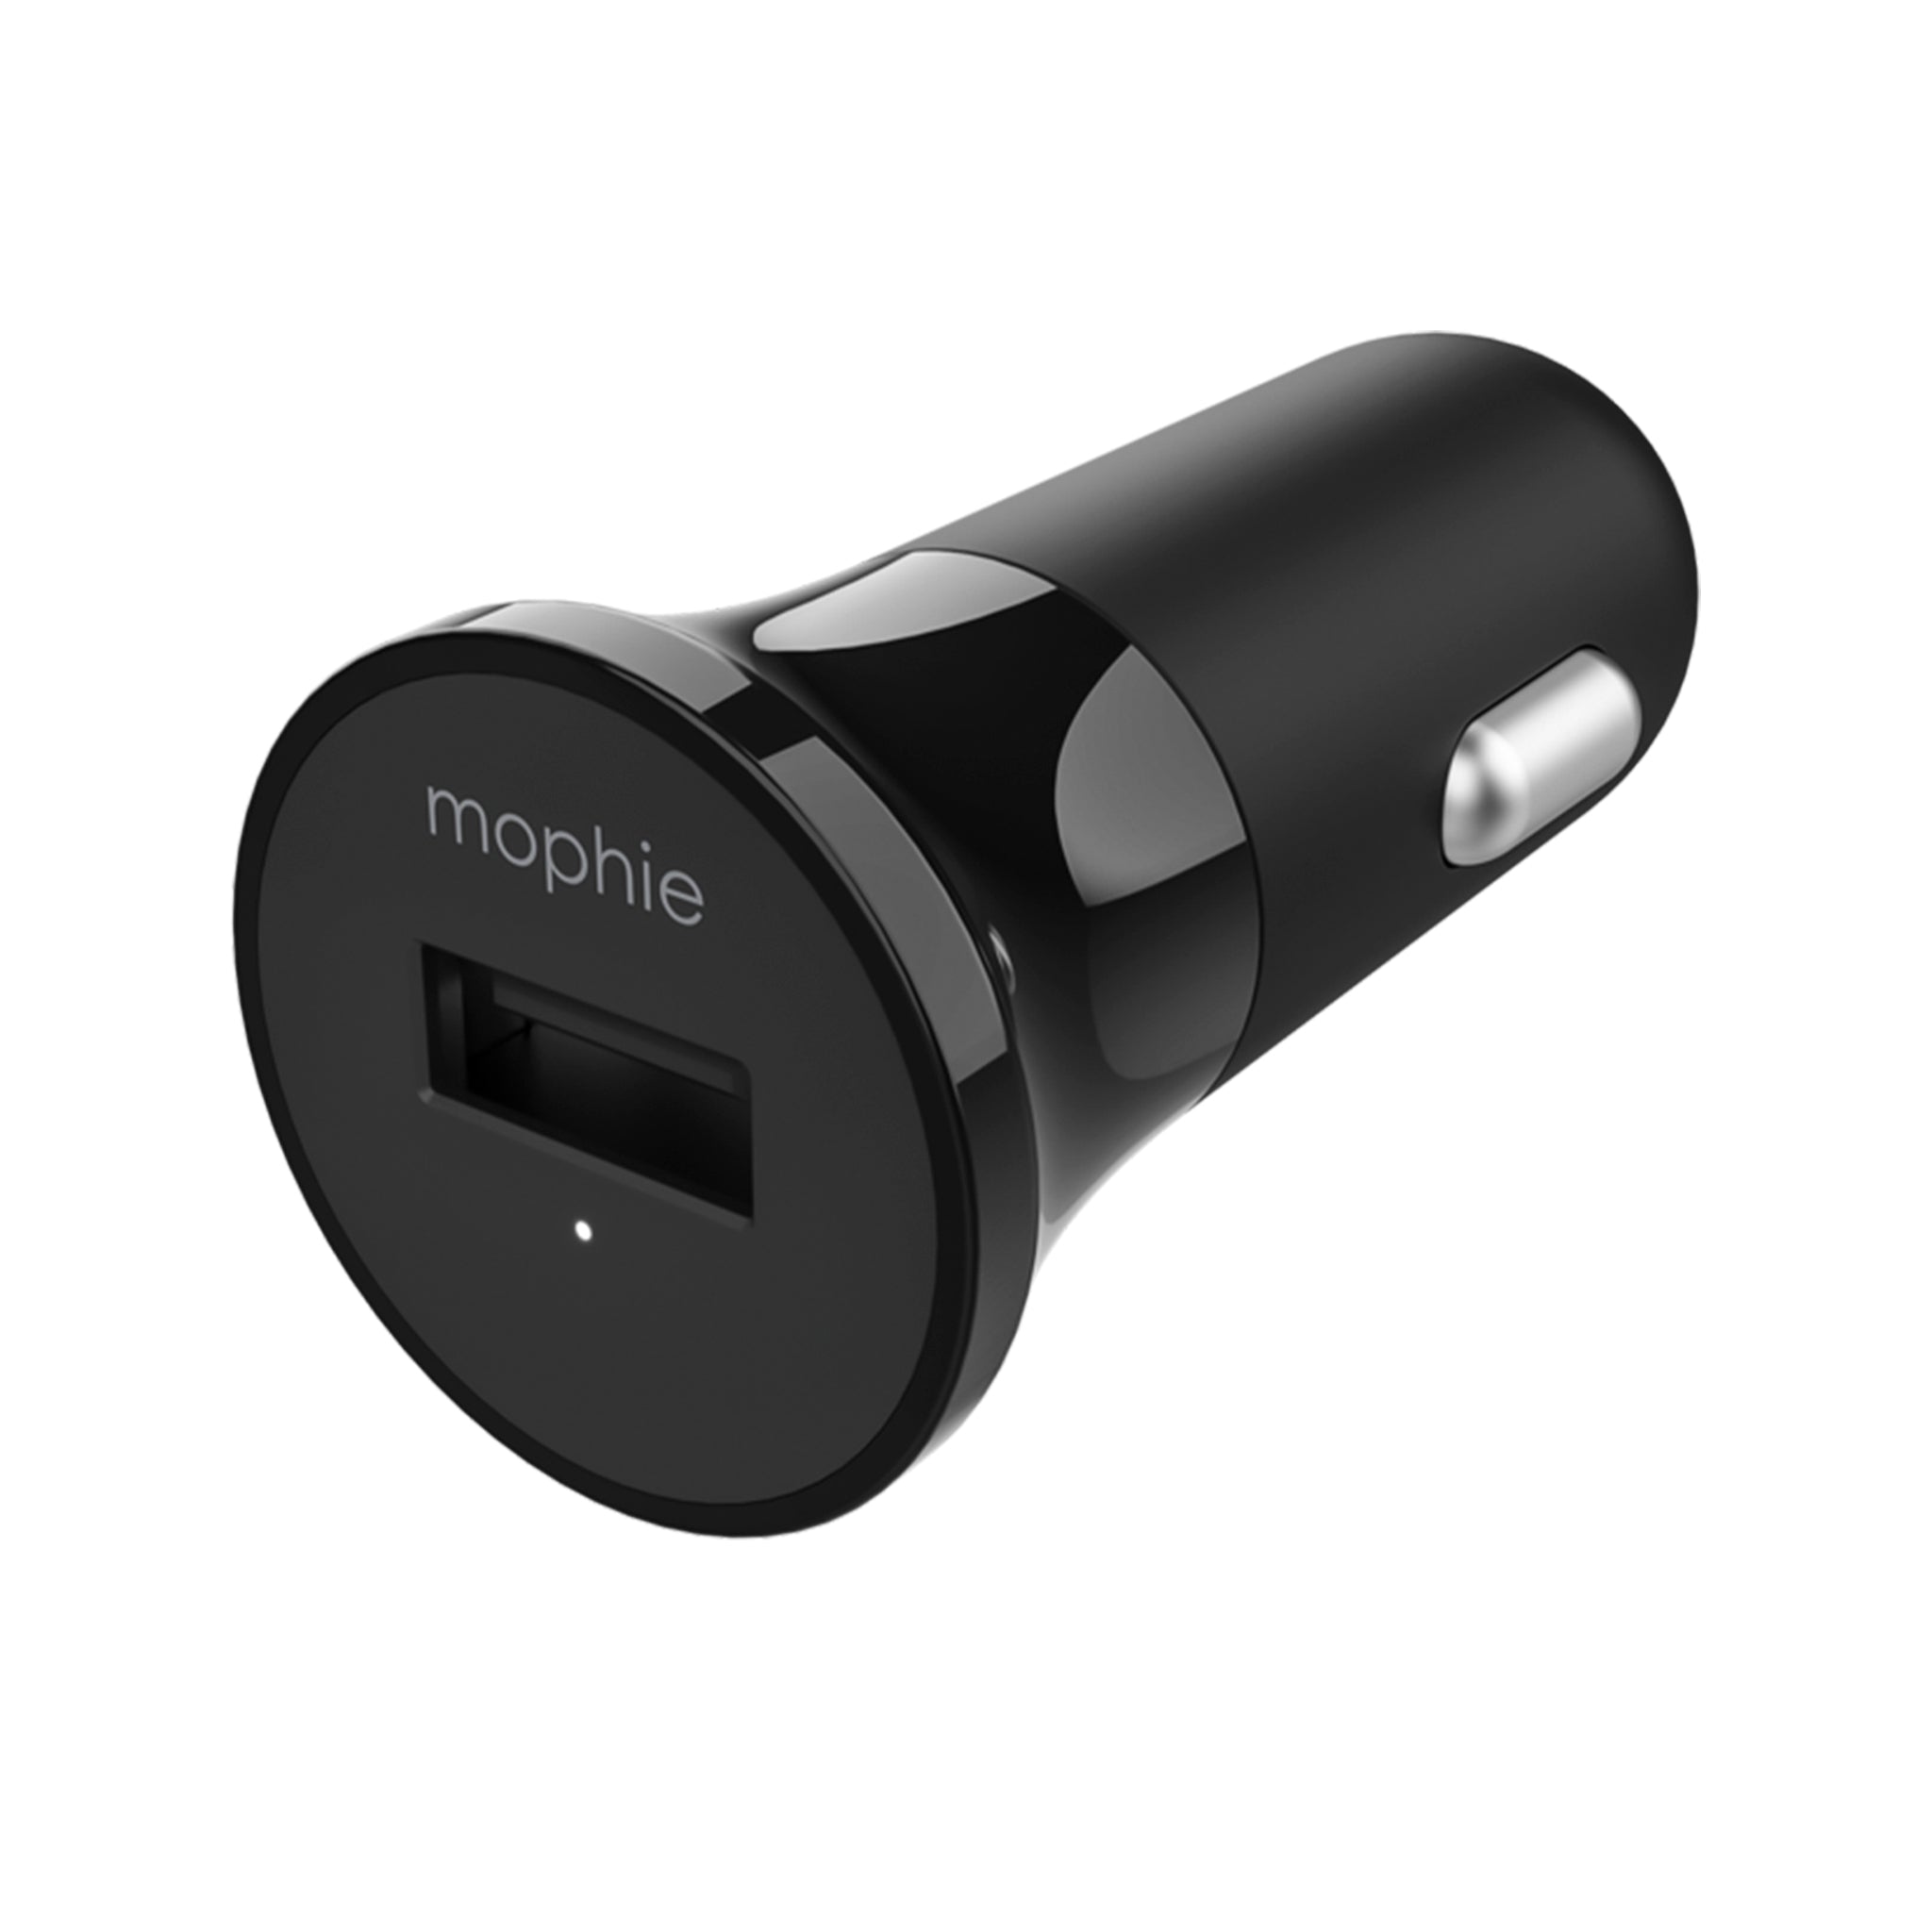 Mophie - Usb A Car Charger 12w - Black